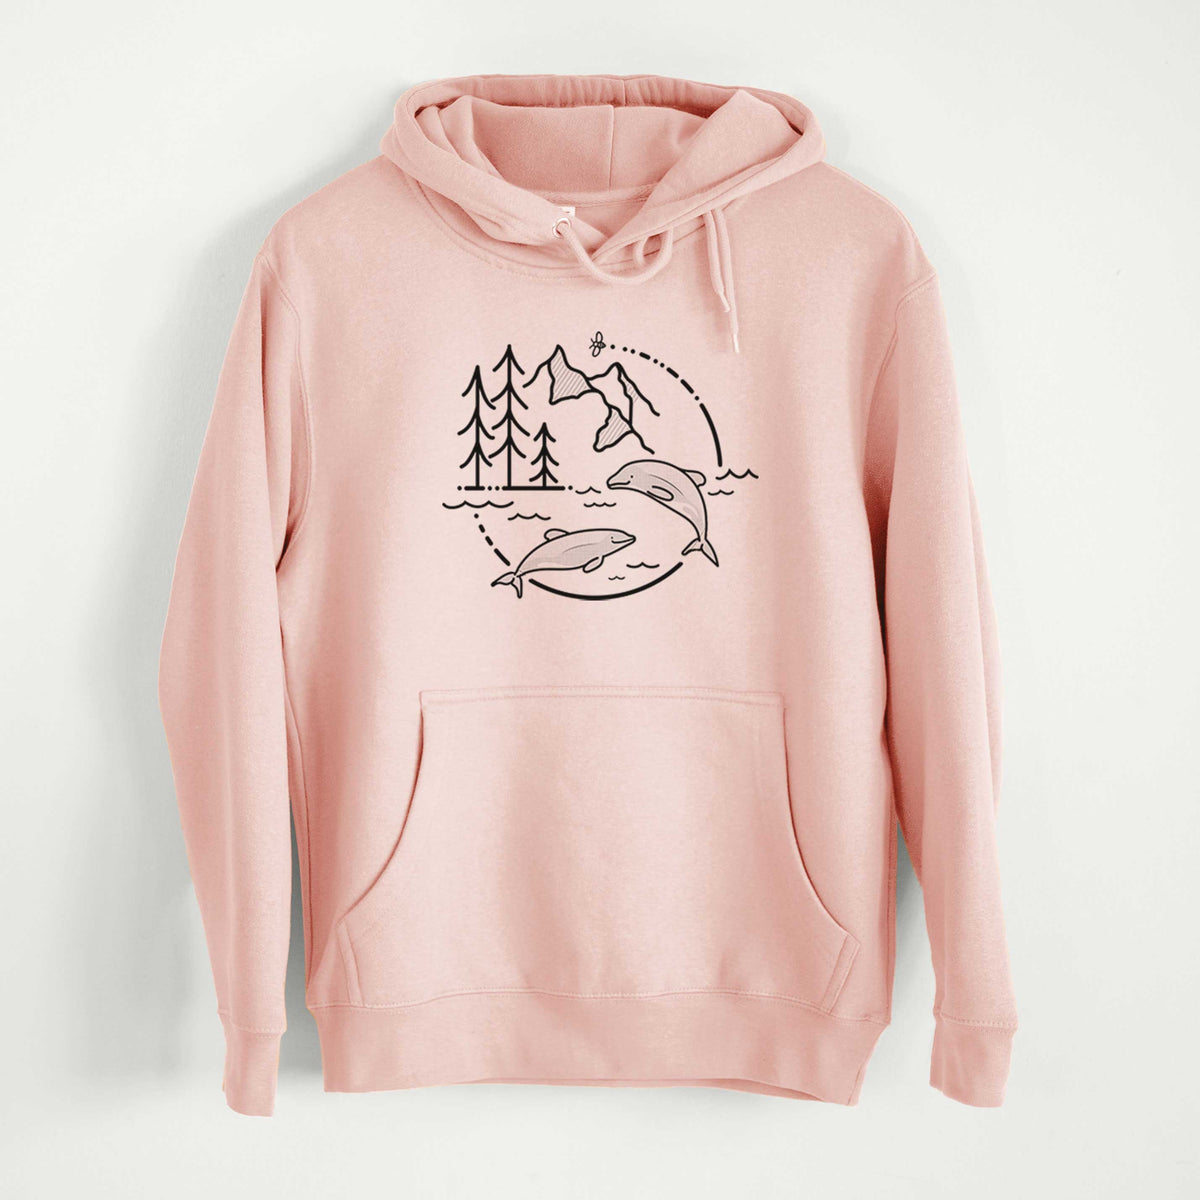 It&#39;s All Connected - Maui Dolphins  - Mid-Weight Unisex Premium Blend Hoodie